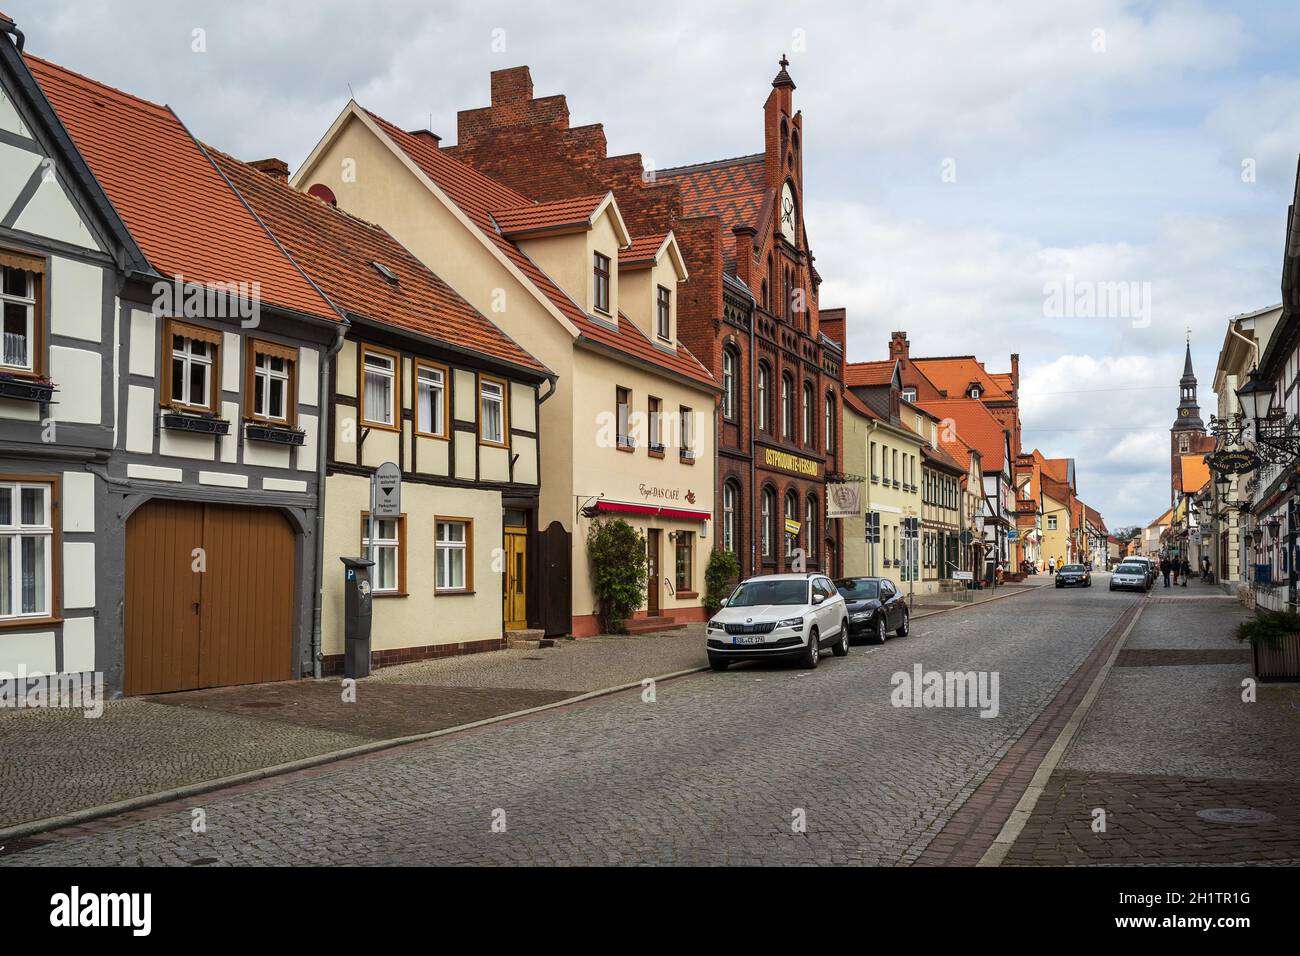 TANGERMUENDE, GERMANY - APRIL 24, 2021: Old street of a historic town of Tangermuende. Saxony-Anhalt state Stock Photo